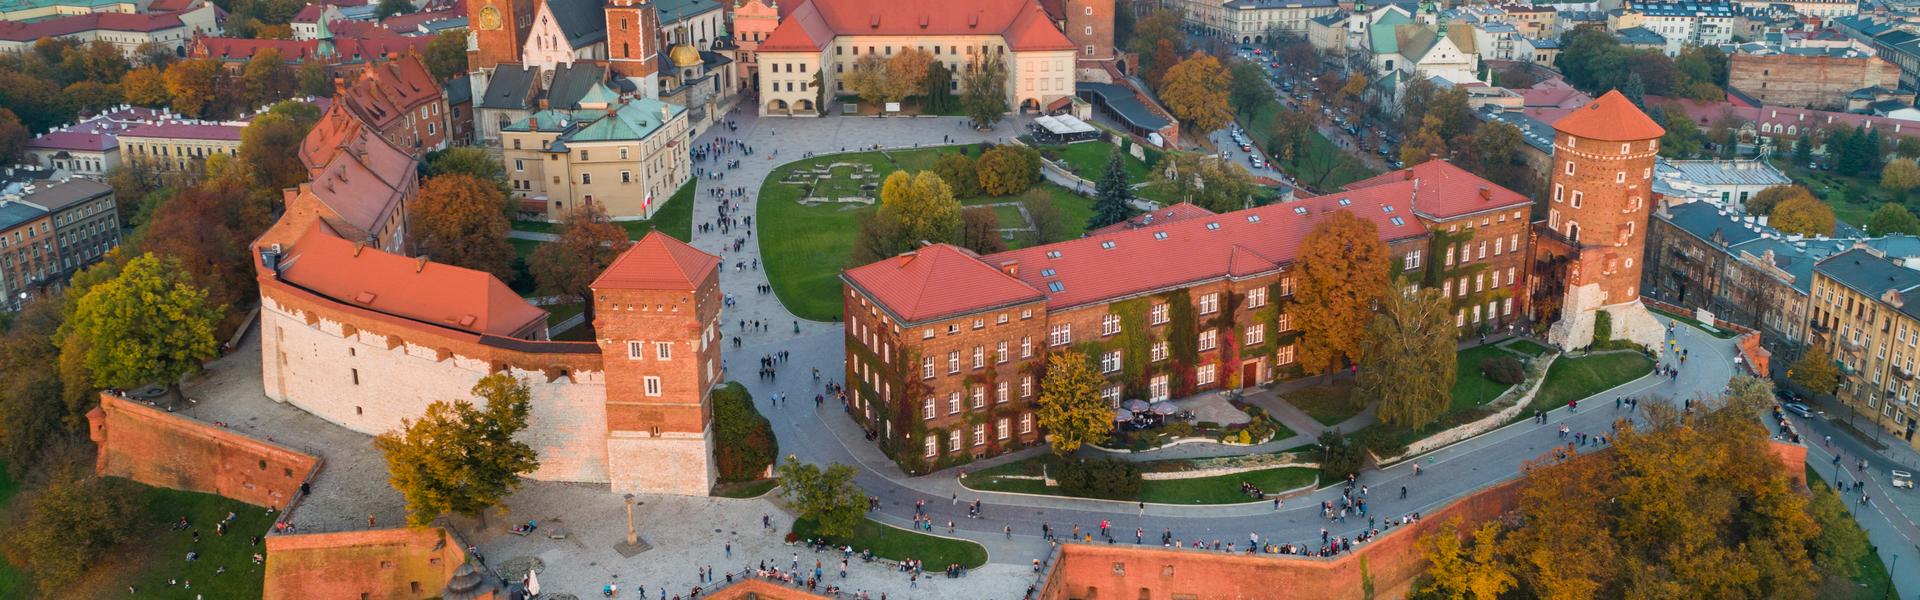 Wawel Royal Castle in Krakow. Aerial view of the castle courtyard and the walls surrounding the castle. There is a view of the city around a tree in the distance.